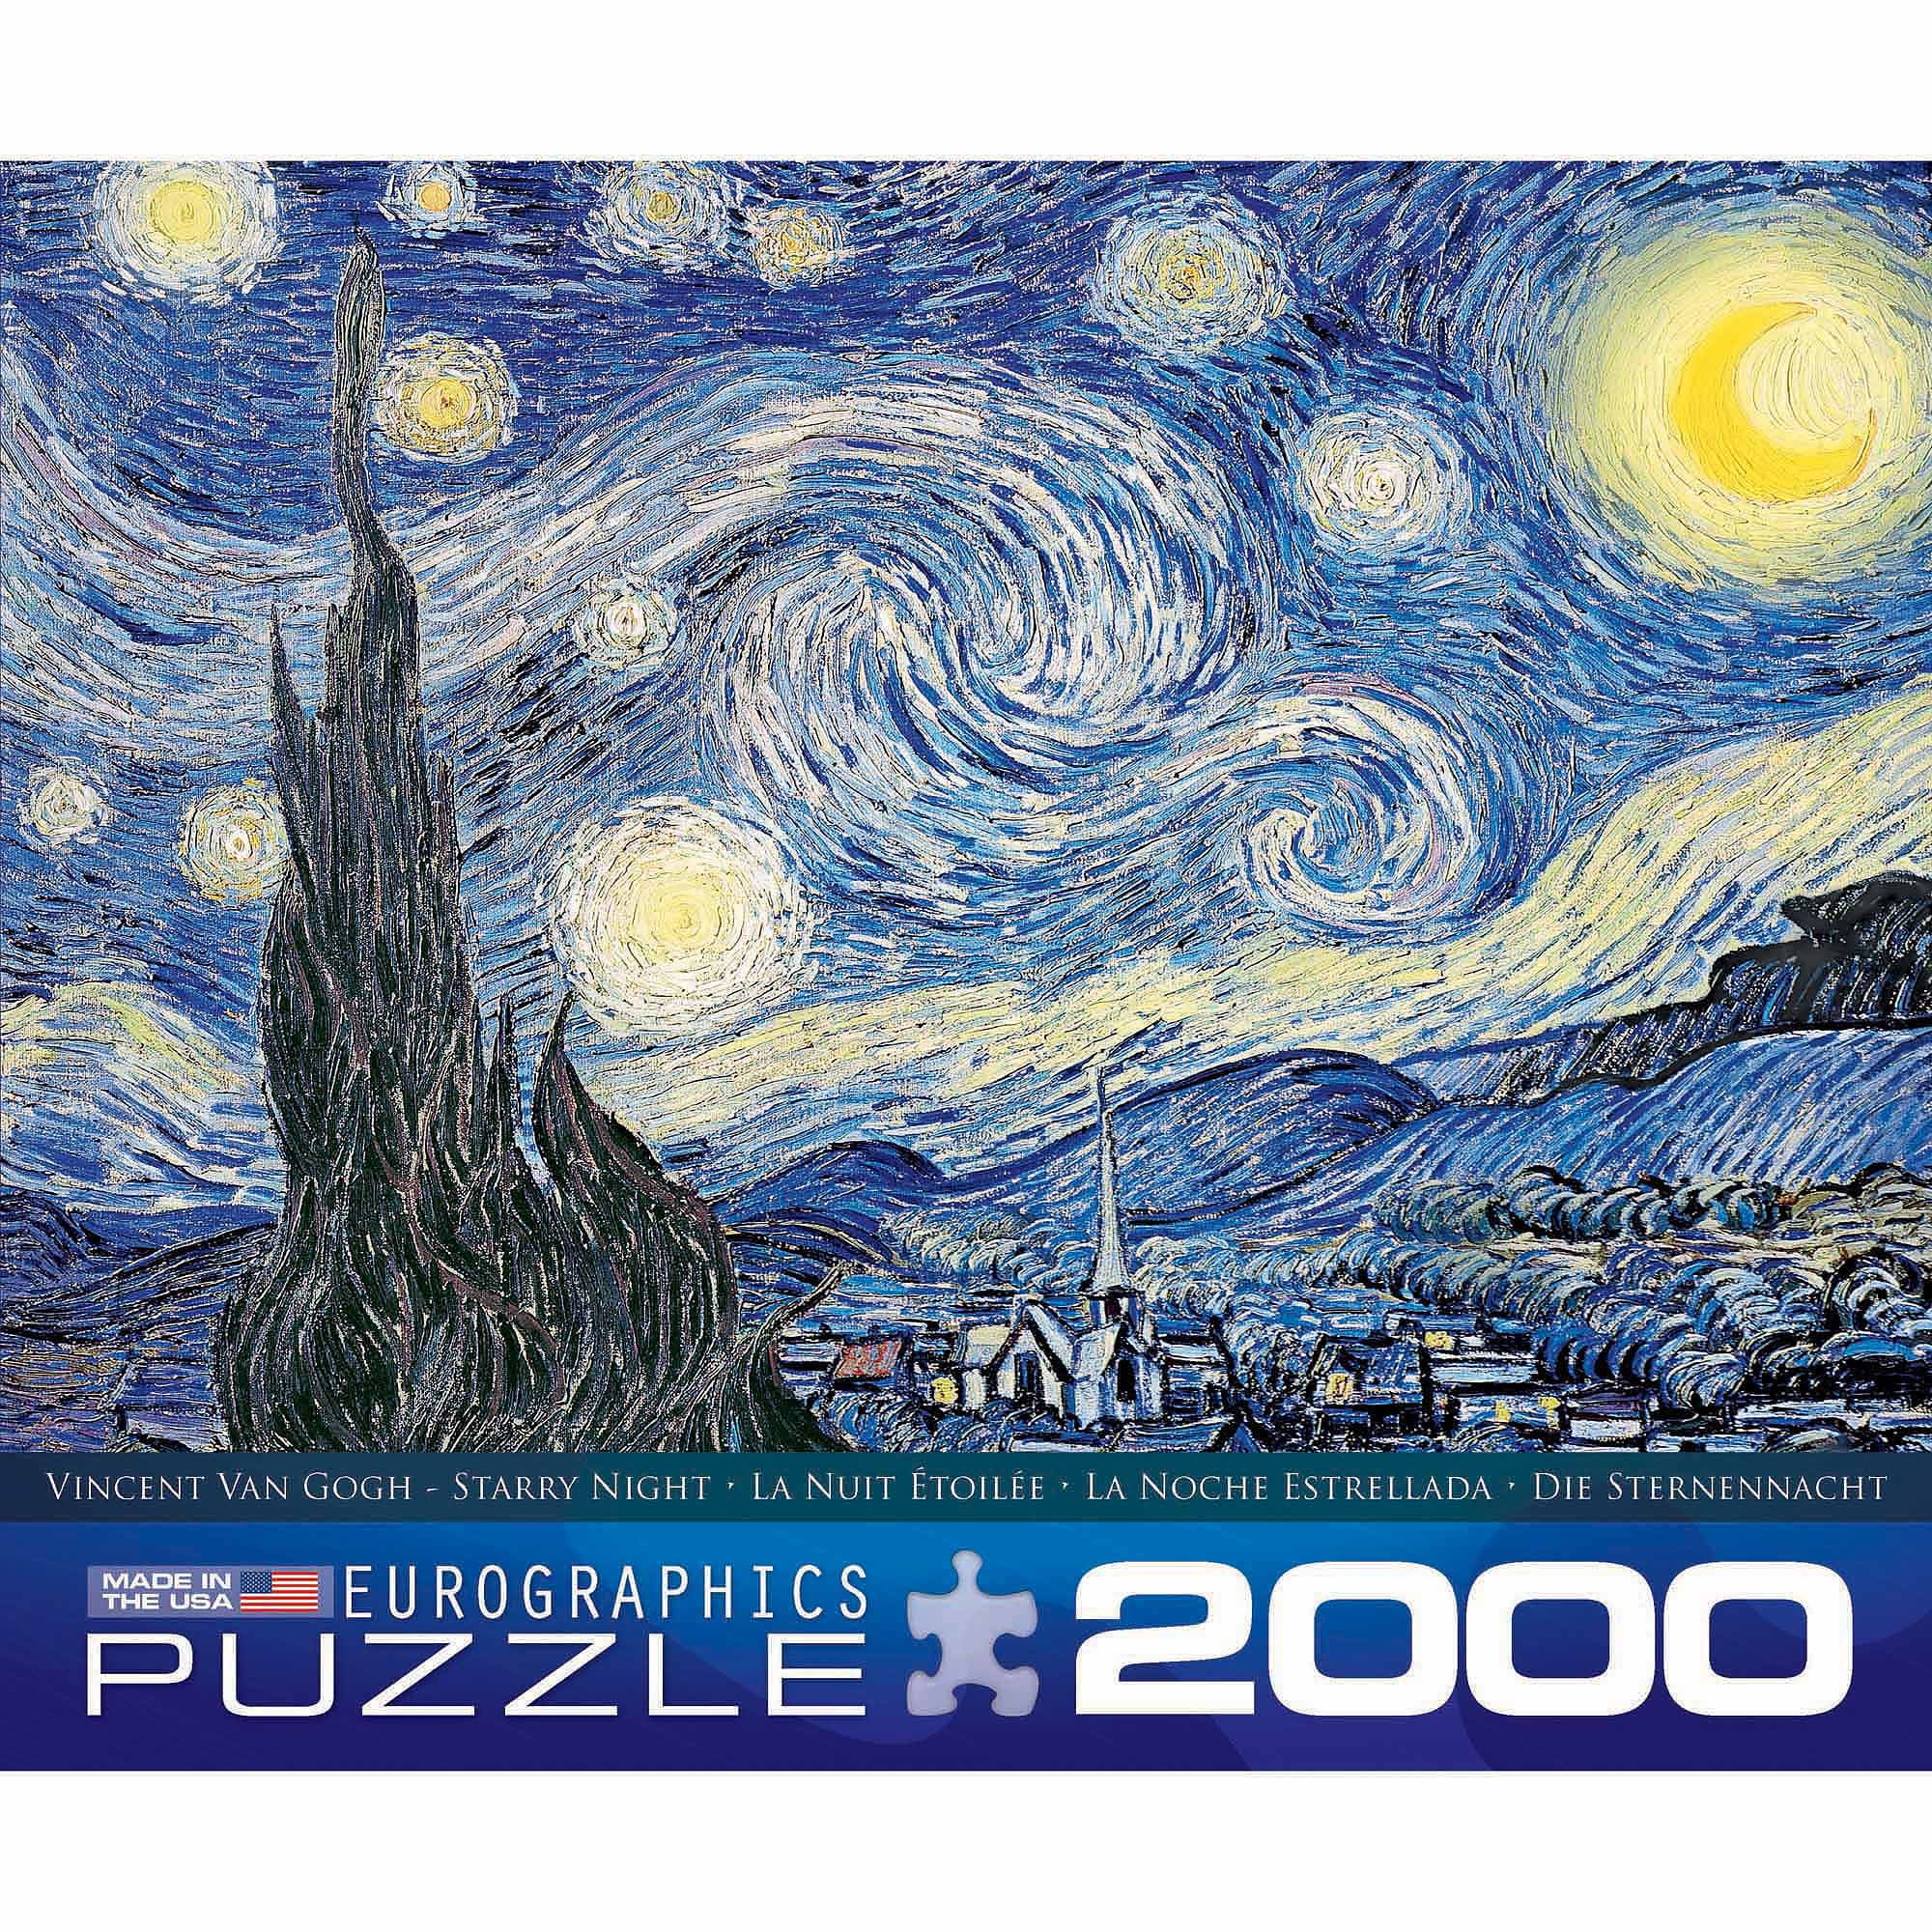 Van Gogh Oil Painting Mini Puzzle Euro graphics Puzzle 100 Pieces Starry Night